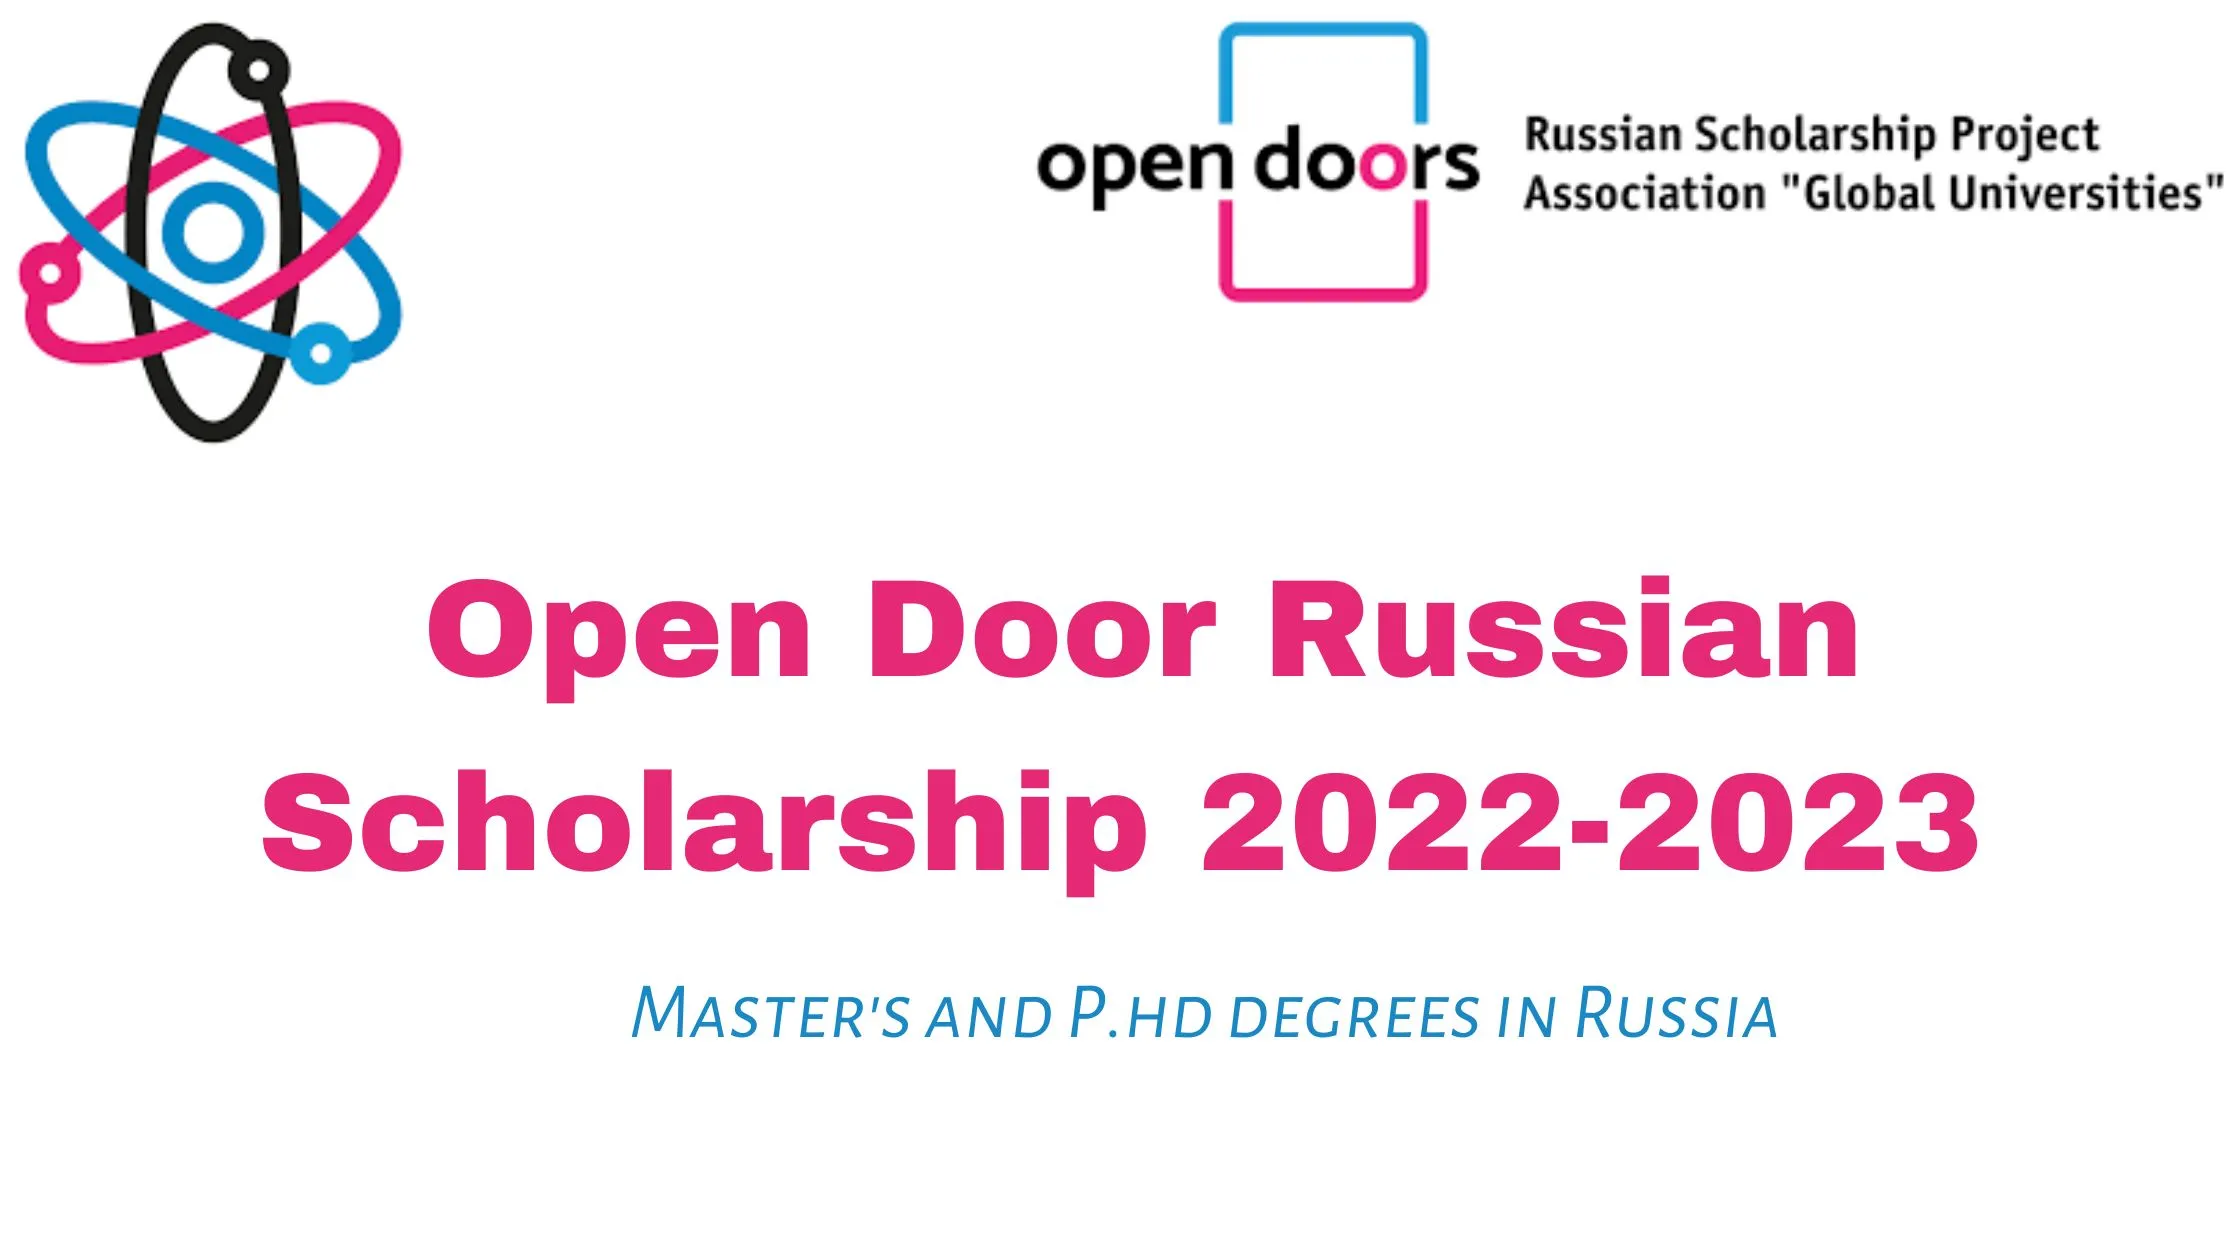 Master's and P.hd degrees in Russia